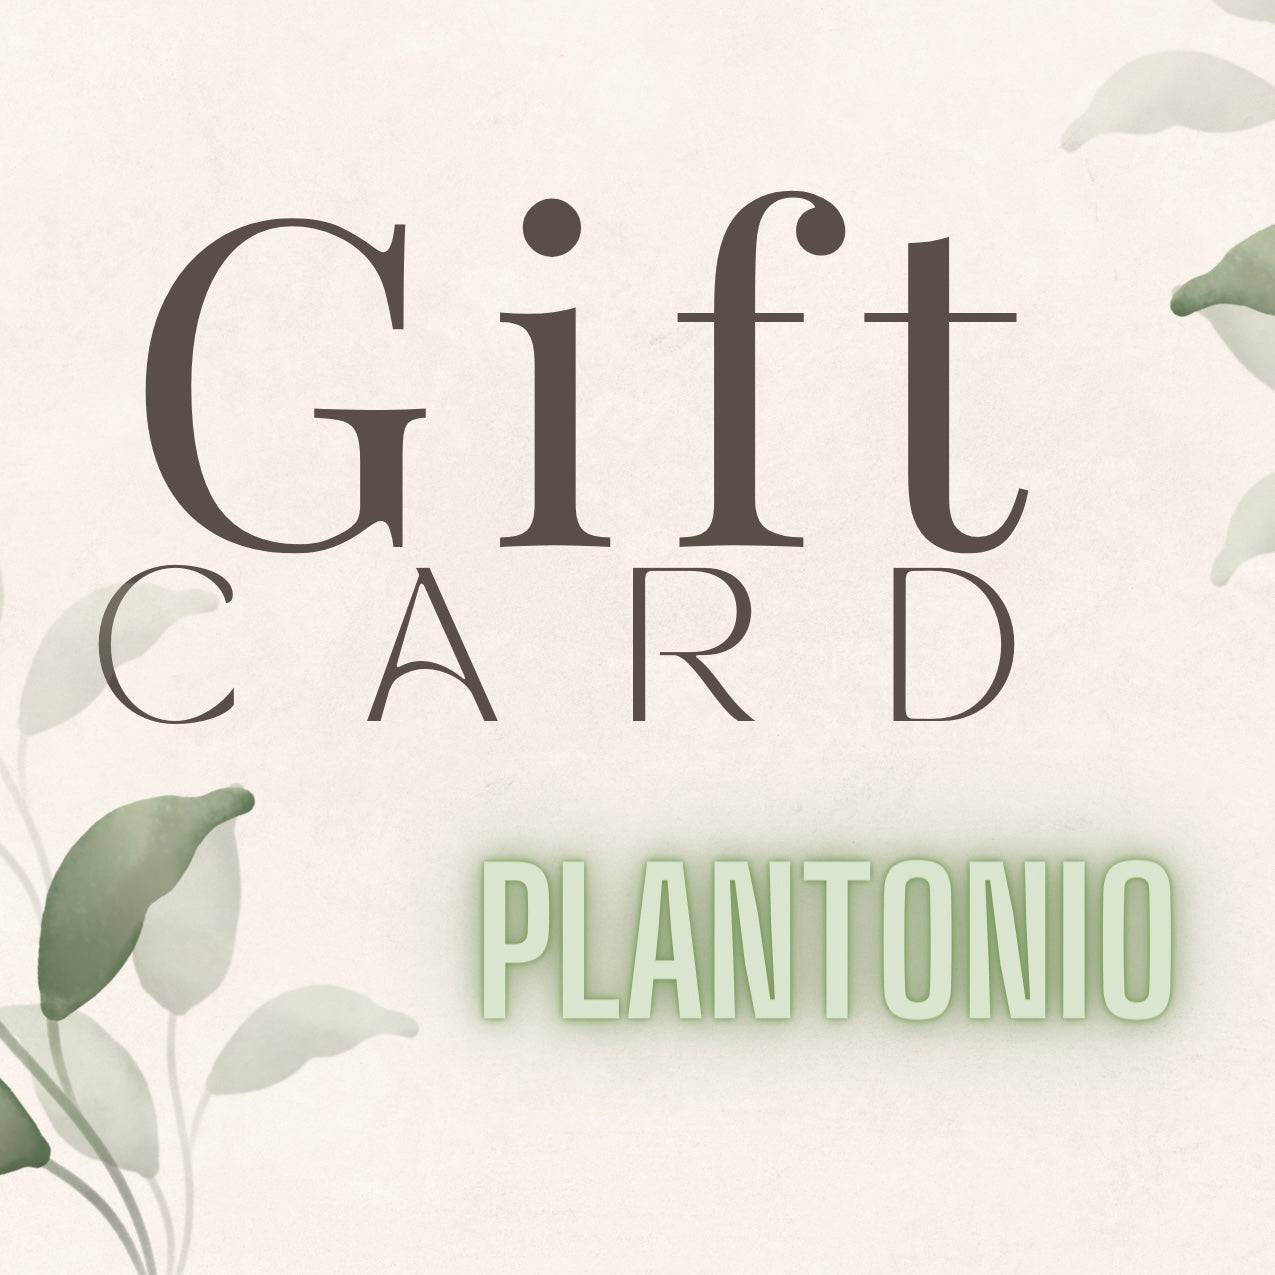 Gift Cards: Bringing Nature's Beauty to Your Loved Ones! - Plantonio